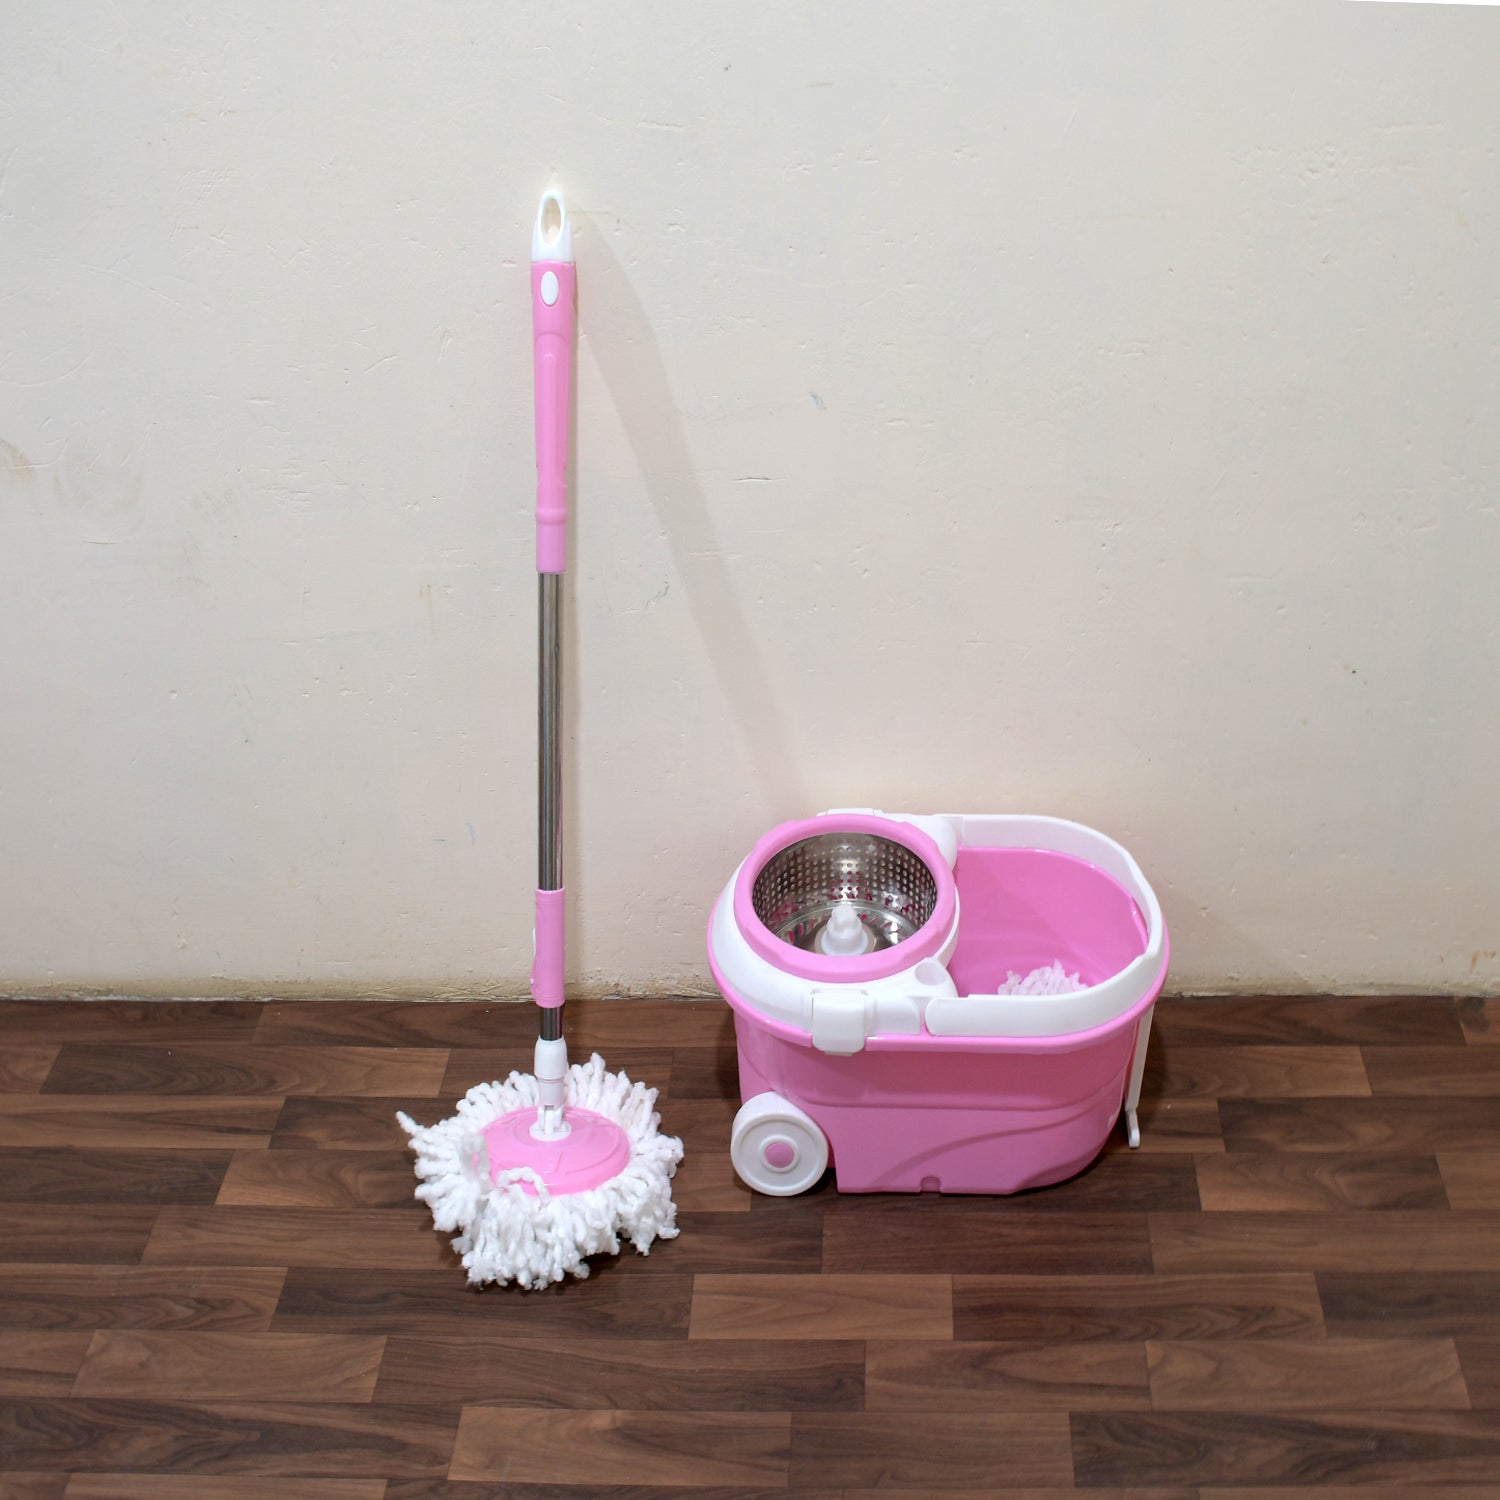 4105 Mop with Bucket For Floor Cleaning With Steel Spin /Mop for Floor Cleaning / Floor Cleaner Mop / Spin Mop / Magic Mop / Mop Stick / Spin Mop Set with Bucket/ Household Office Cleaning Tool Mop